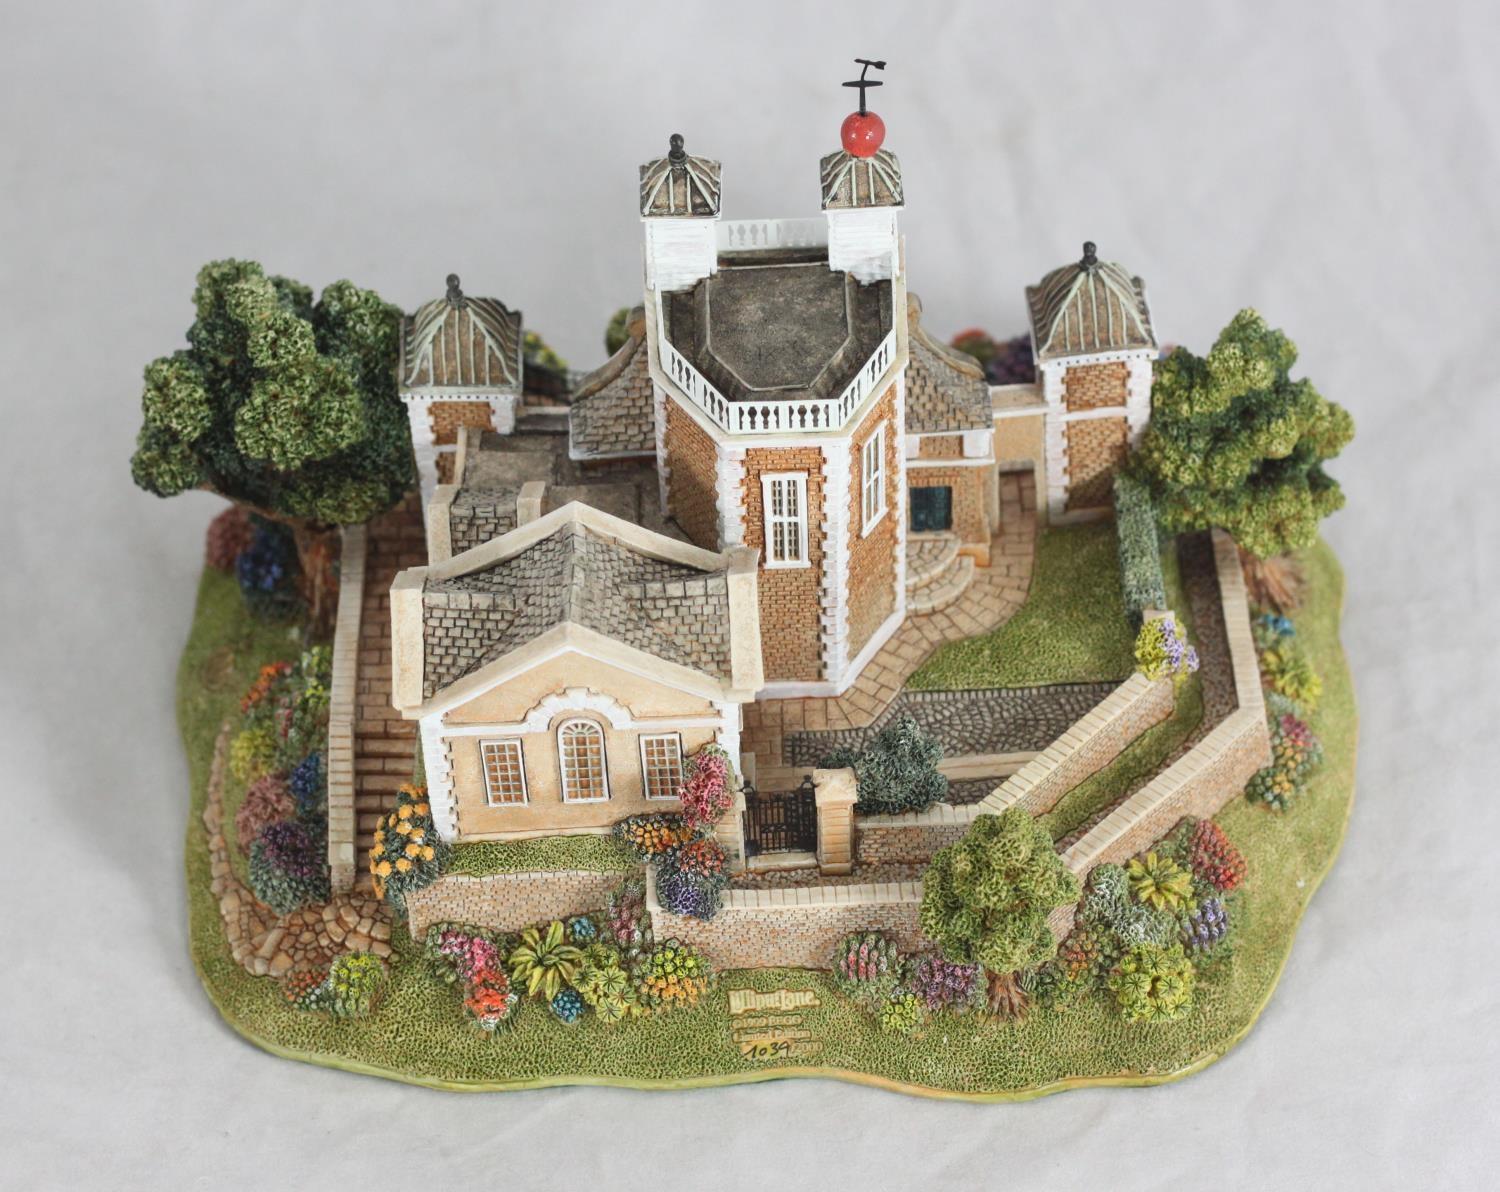 A limited edition large Lilliput Lane model of 'The Old Royal Observatory', model no. L2245, limited